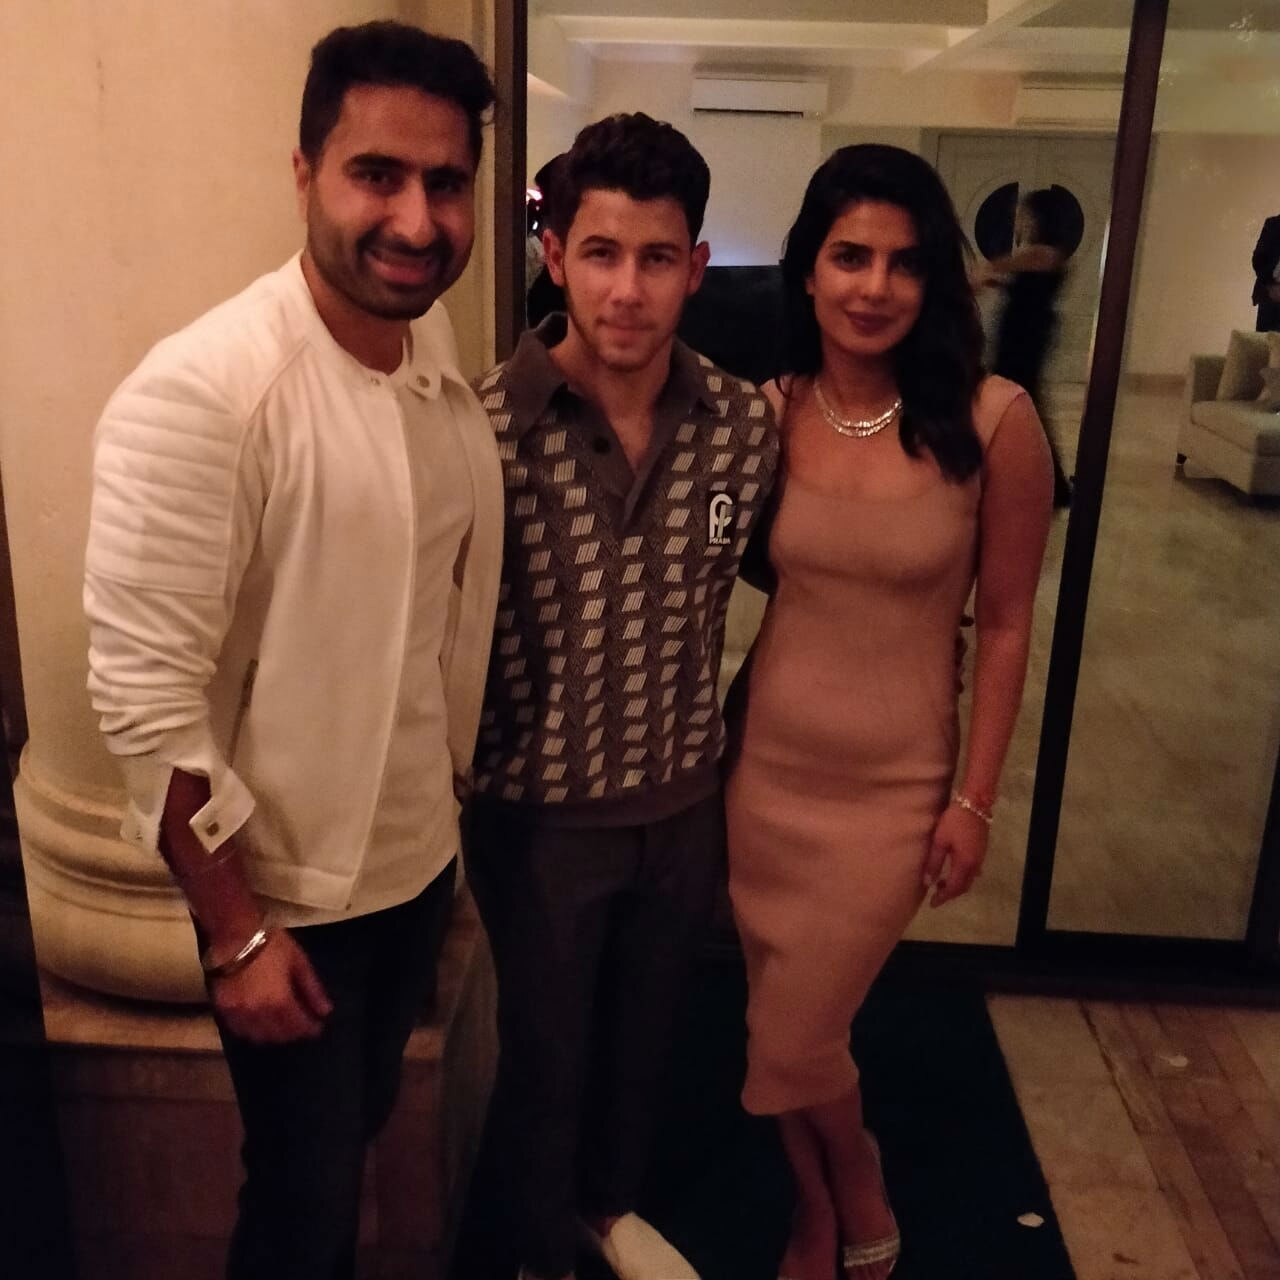 DJ Khushi gives some inside details from PC’s party, says ‘Nick Jonas is more Indian than American'!